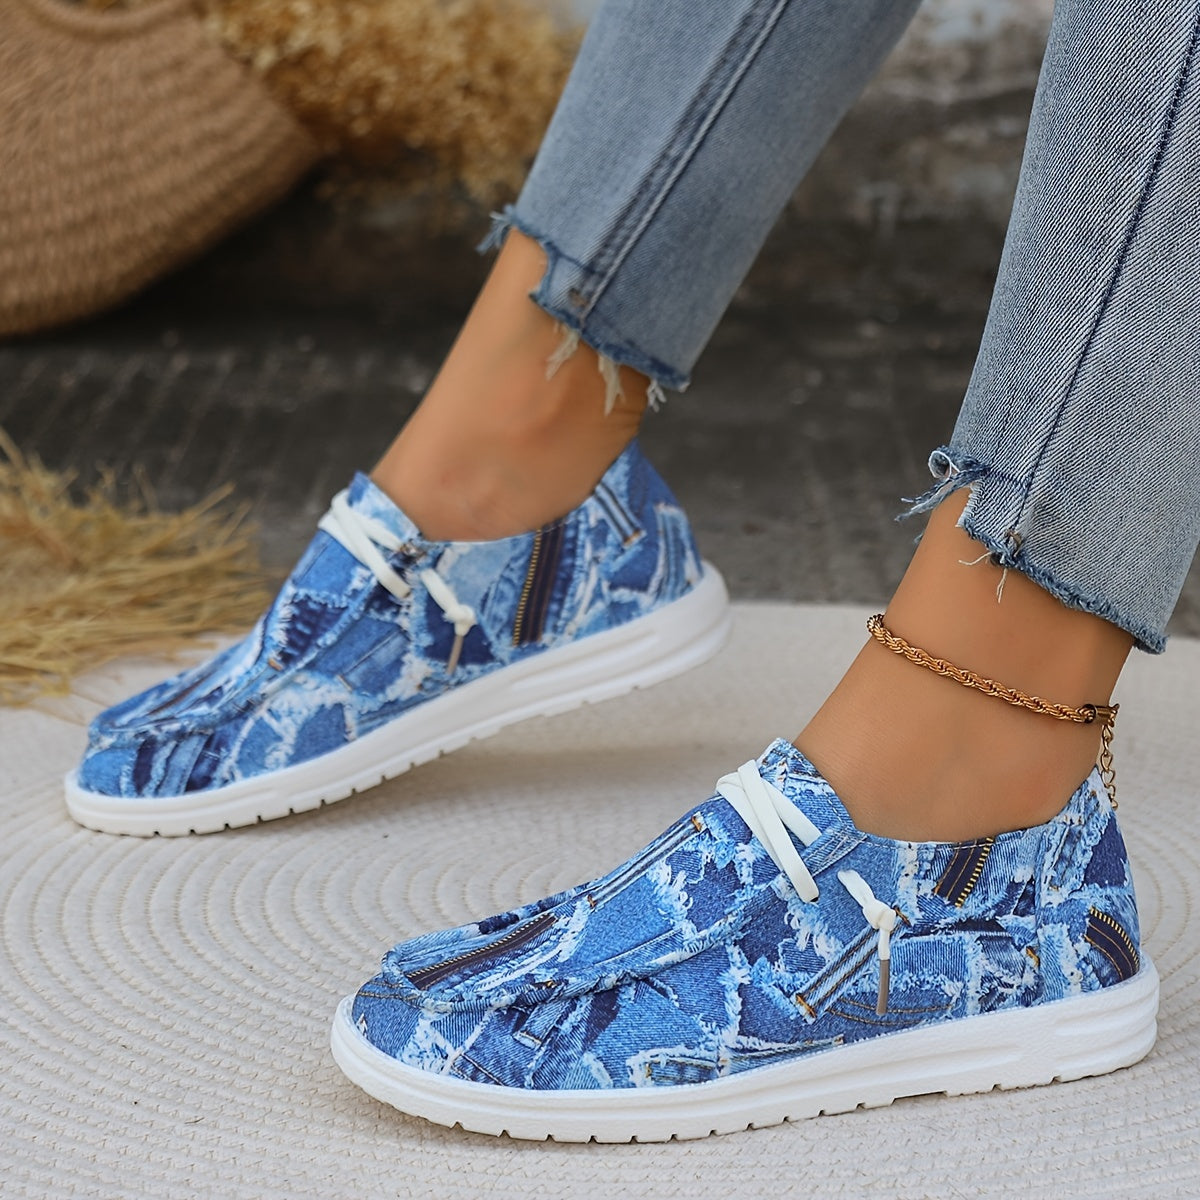 Women's Denim Print Flat Shoes, Casual Round Toe Slip On Canvas Shoes, Lightweight Low Top Sneakers